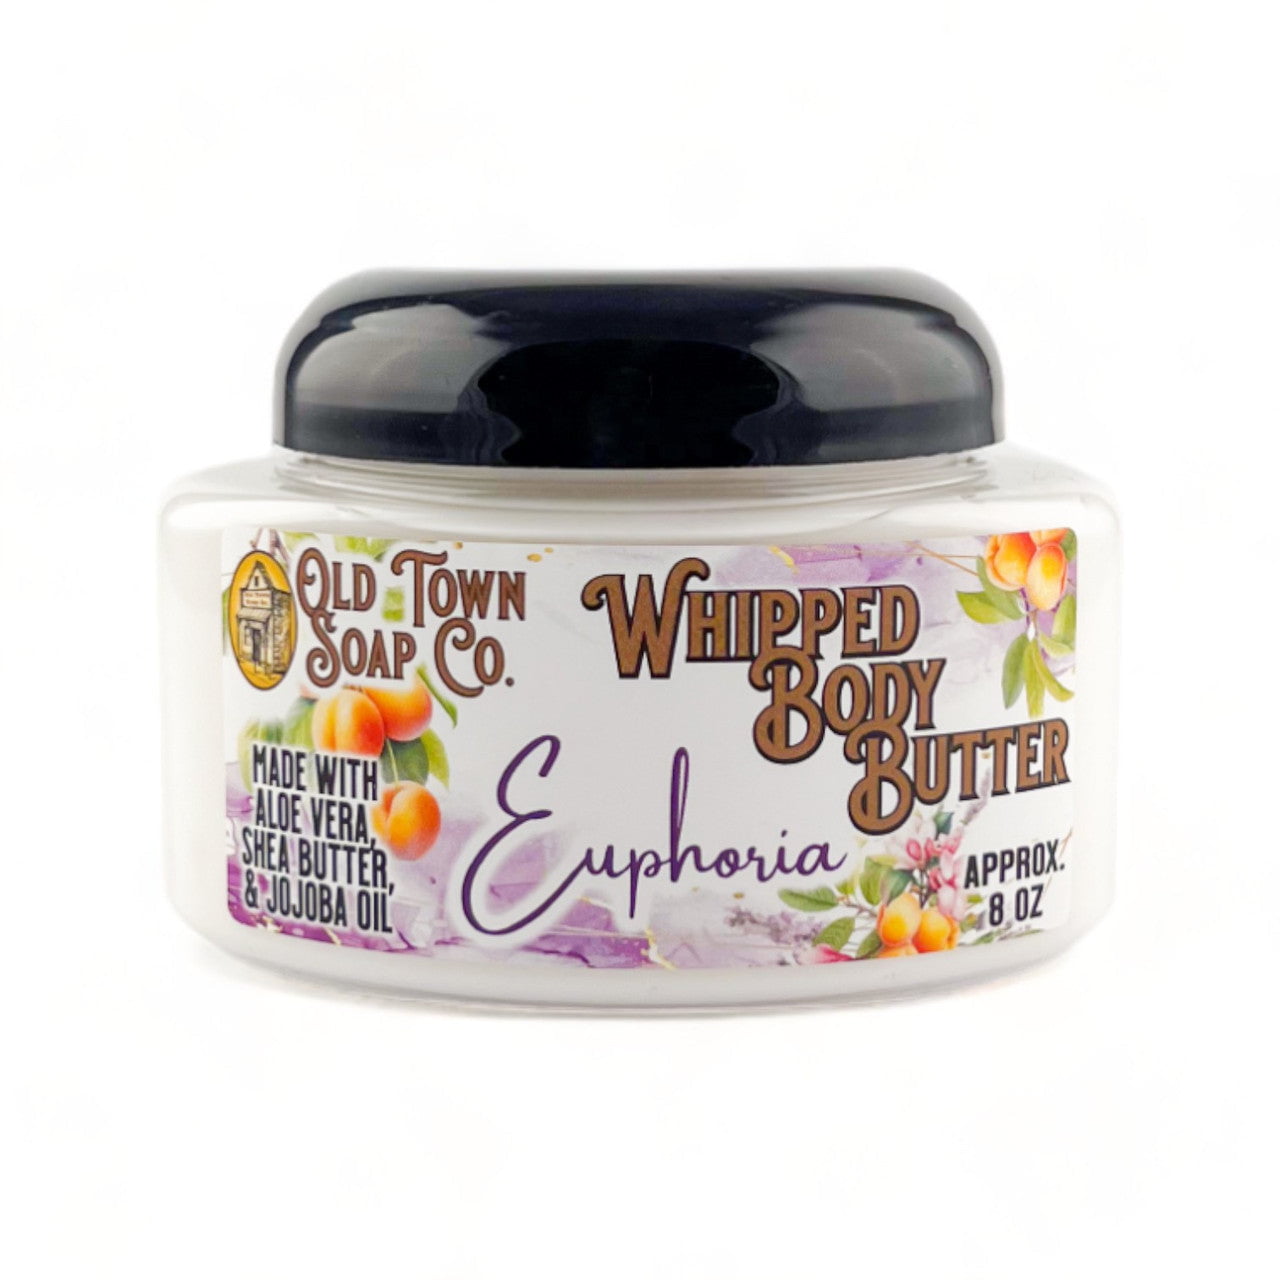 Euphoria -Whipped Body Butter - Old Town Soap Co.